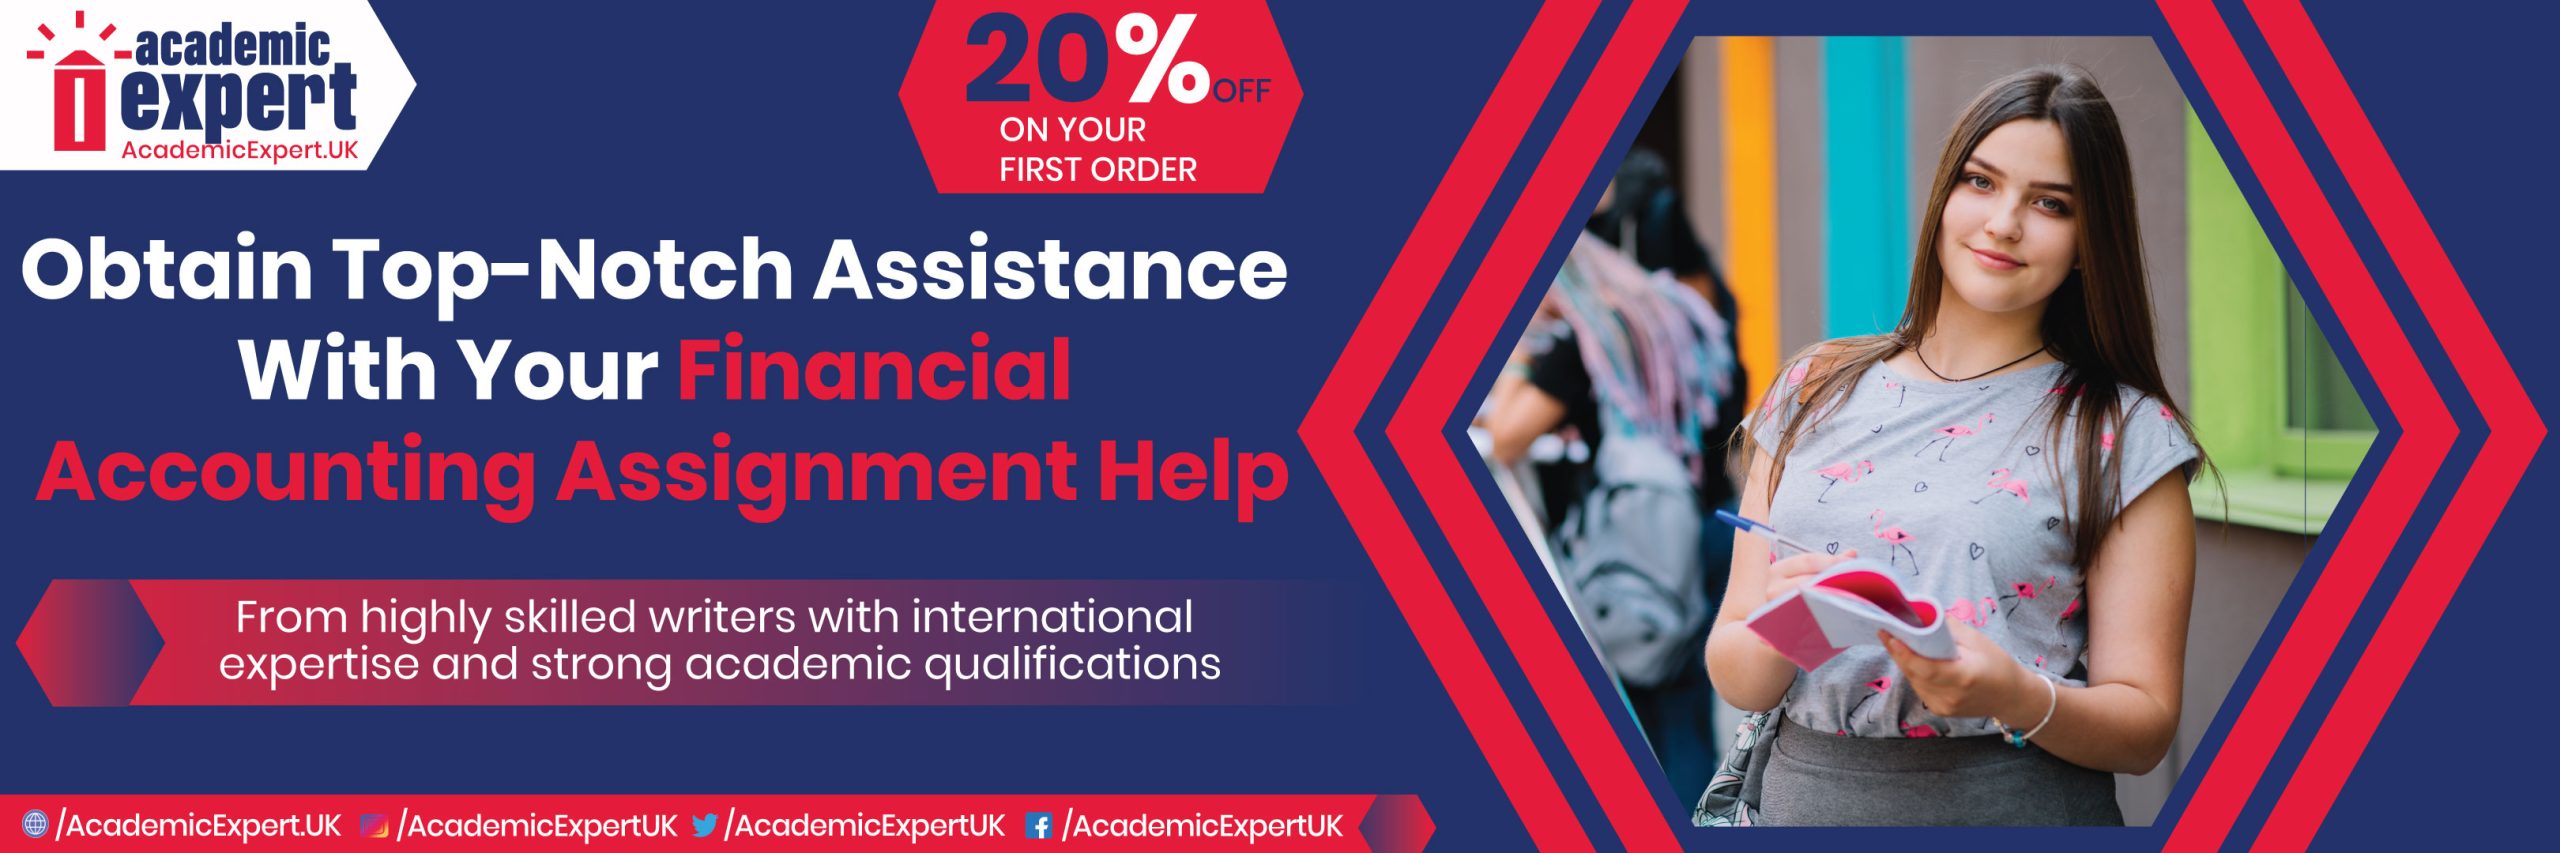 OBTAIN TOP-NOTCH ASSISTANCE WITH YOUR FINANCIAL ACCOUNTING ASSIGNMENT HELP